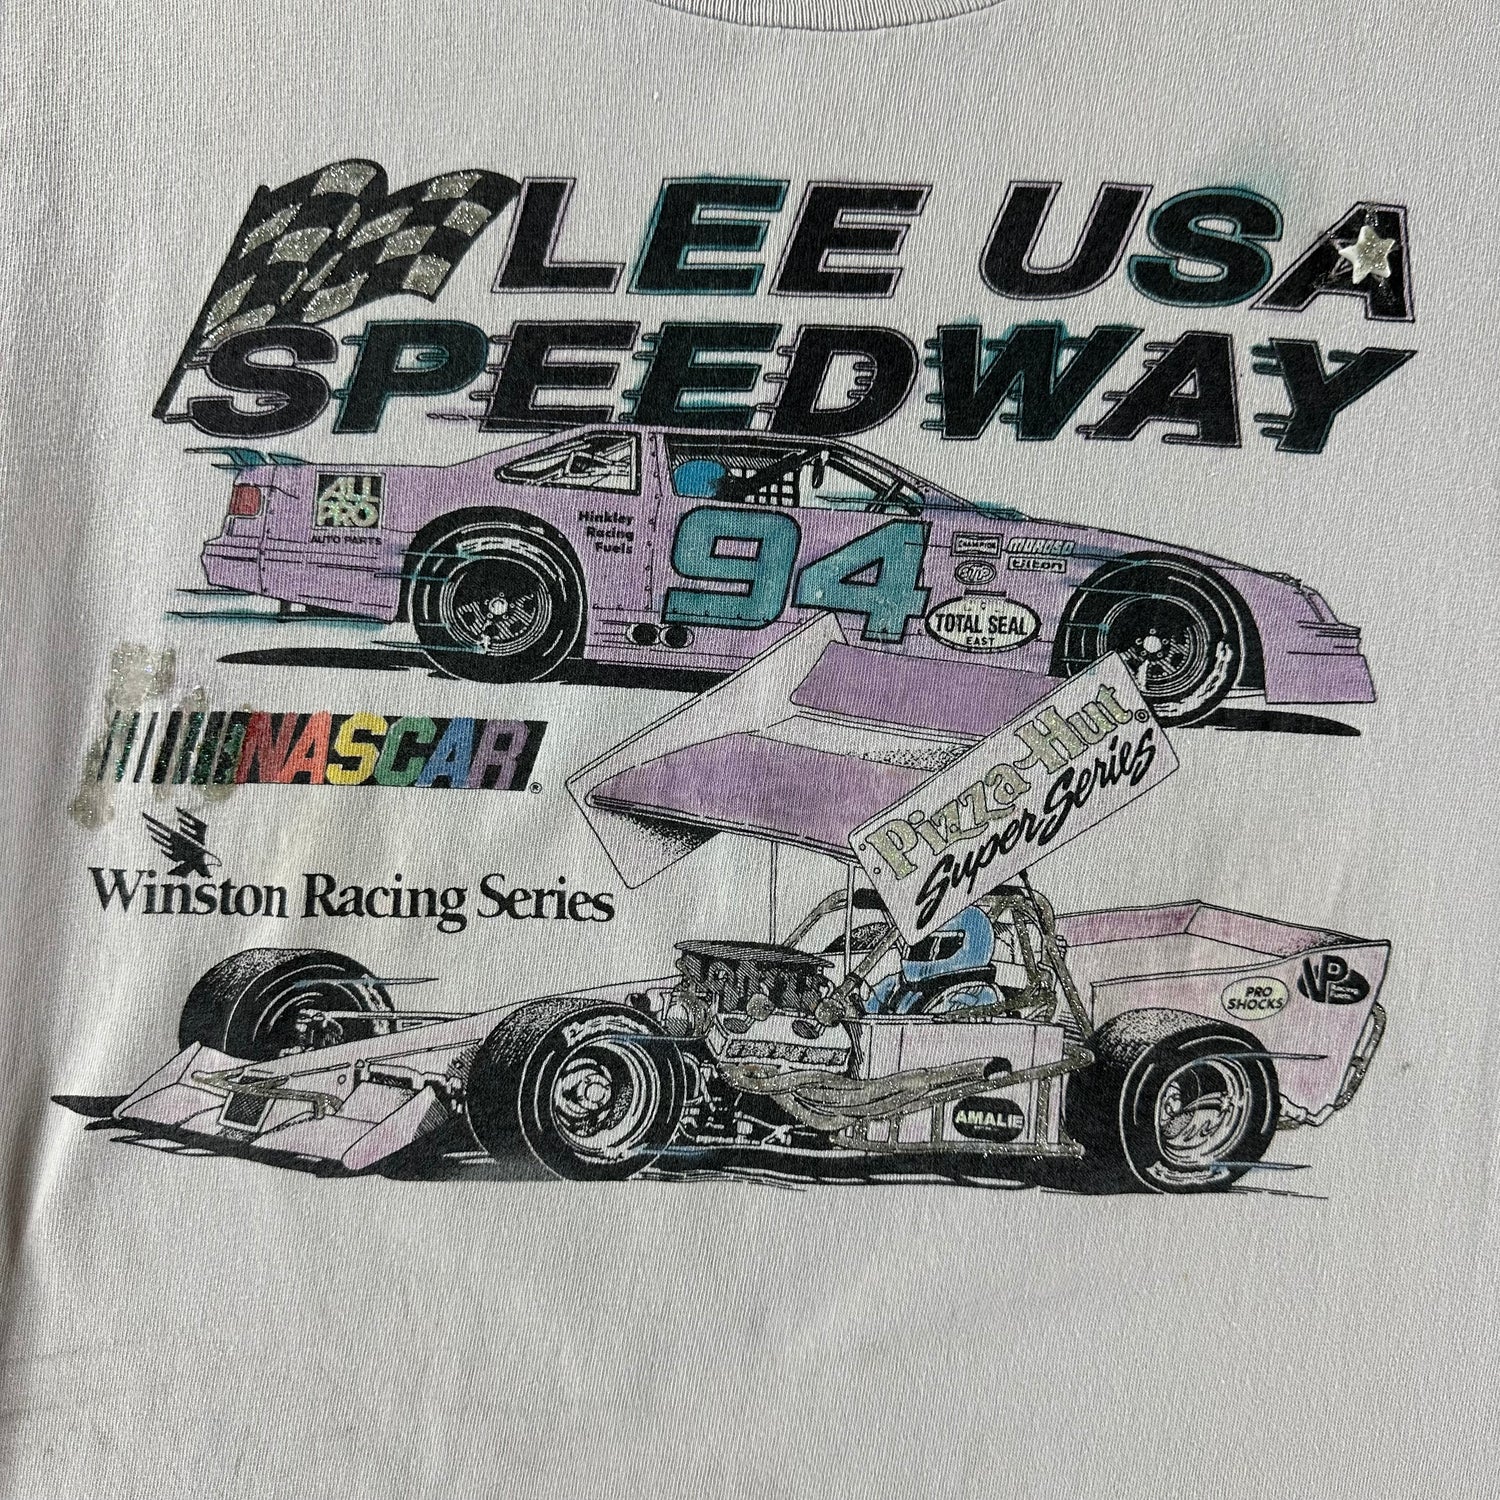 Vintage 1990s NASCAR T-shirt size Small